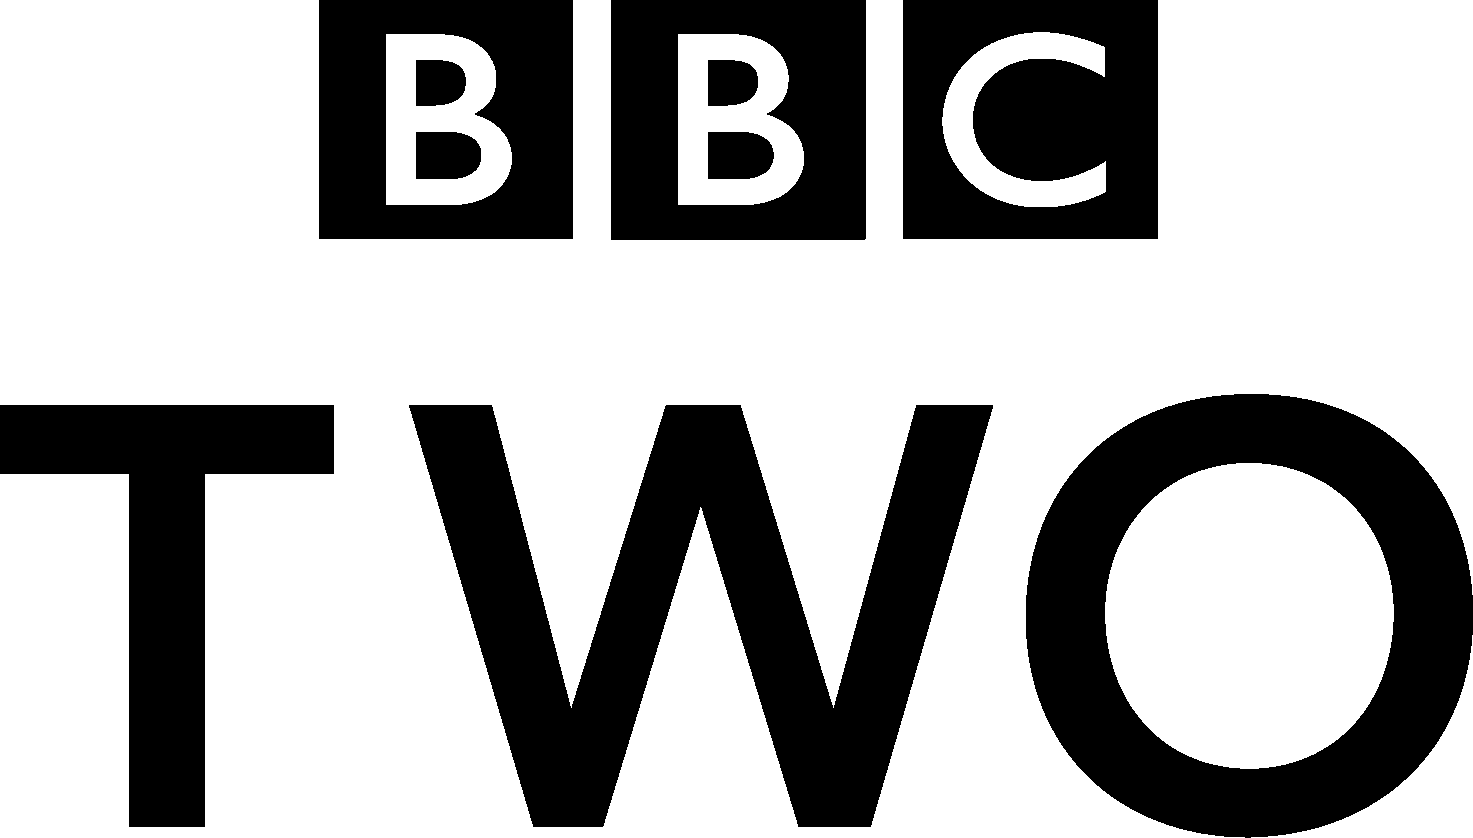 Two -Face Logo - Image - BBC Two square-less logo.png | Logopedia | FANDOM powered by ...